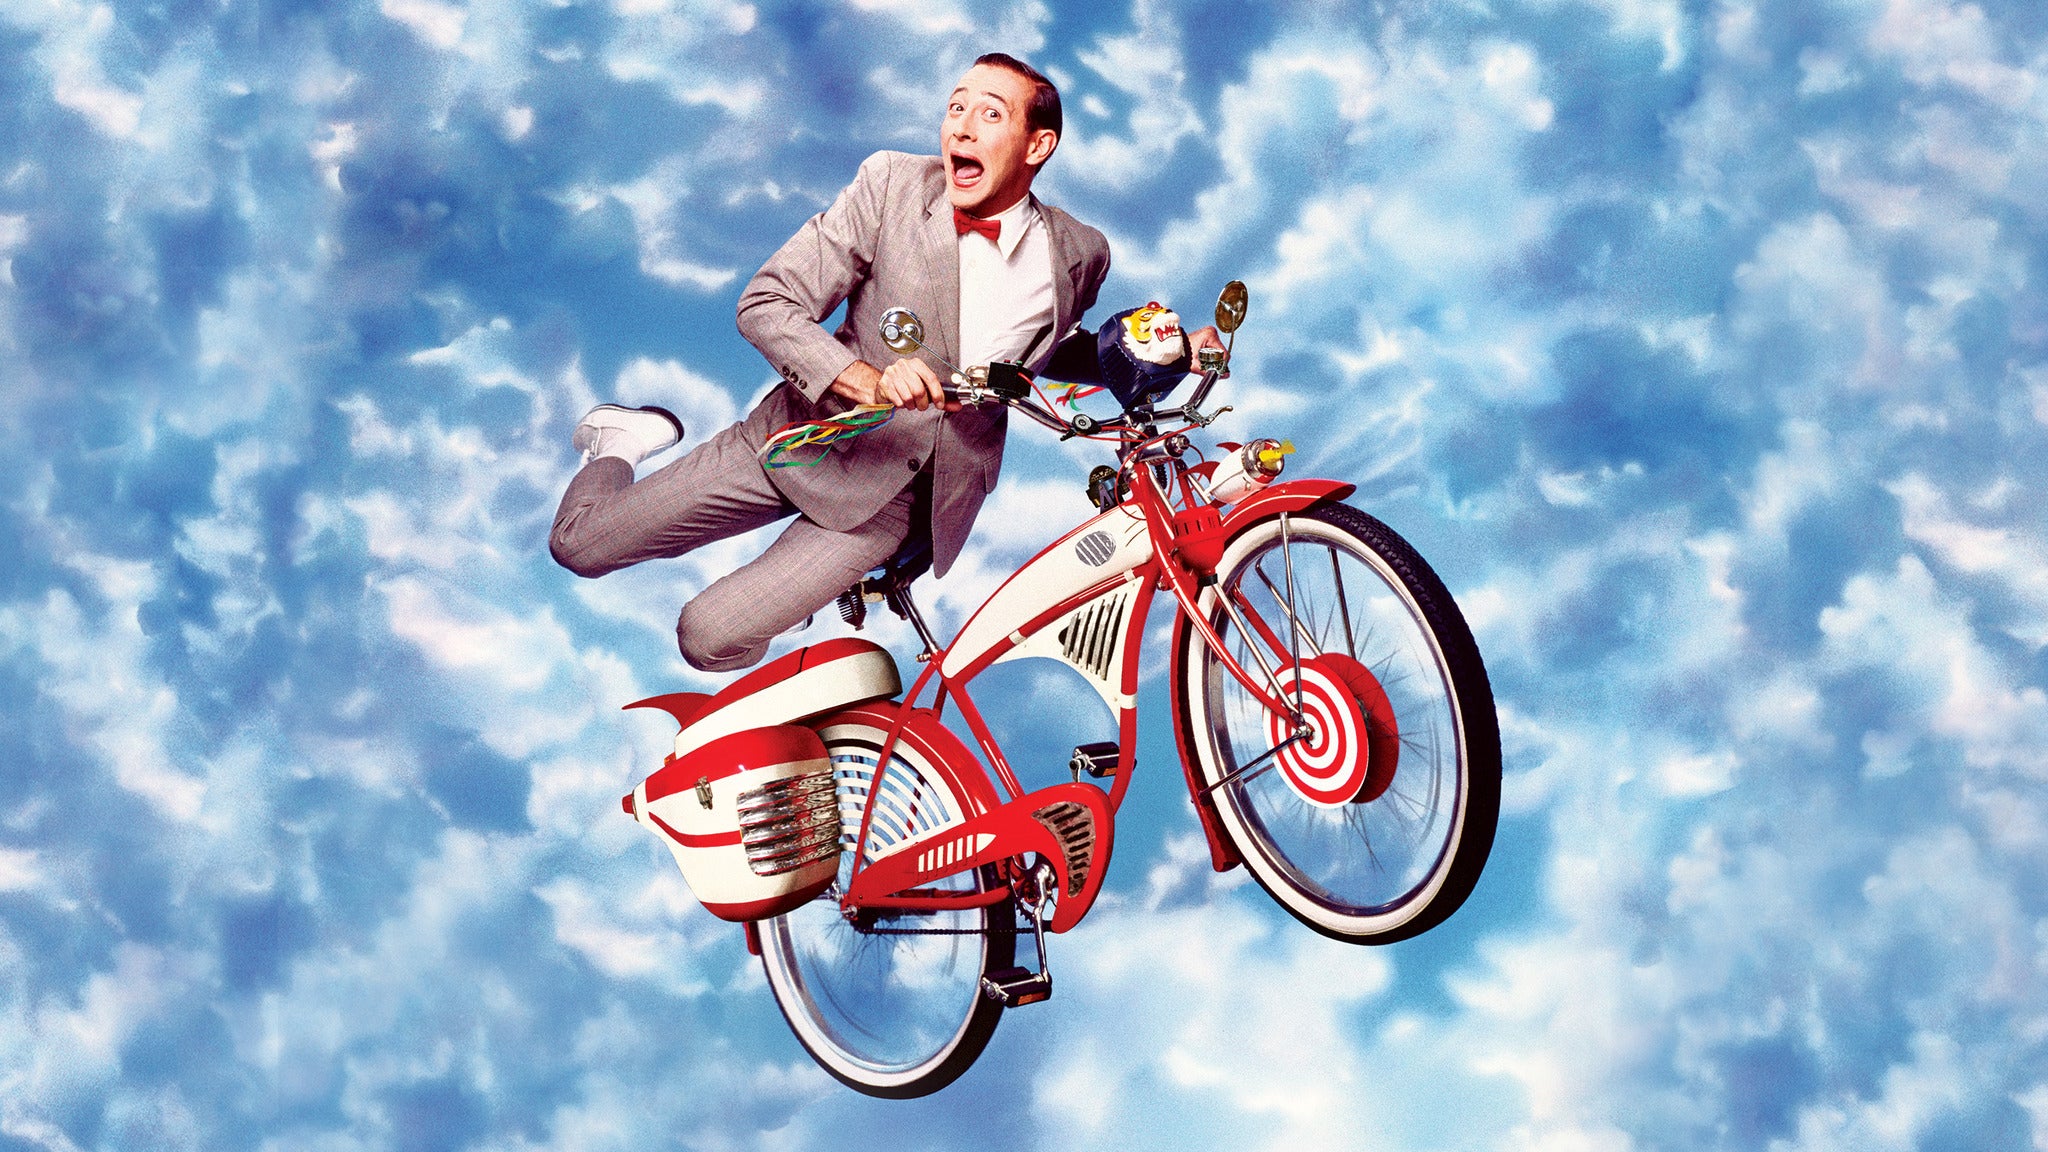 Pee-wee's Big Adventure 35th Anniversary Tour with Paul Reubens in San Antonio promo photo for VIP Package Onsale presale offer code